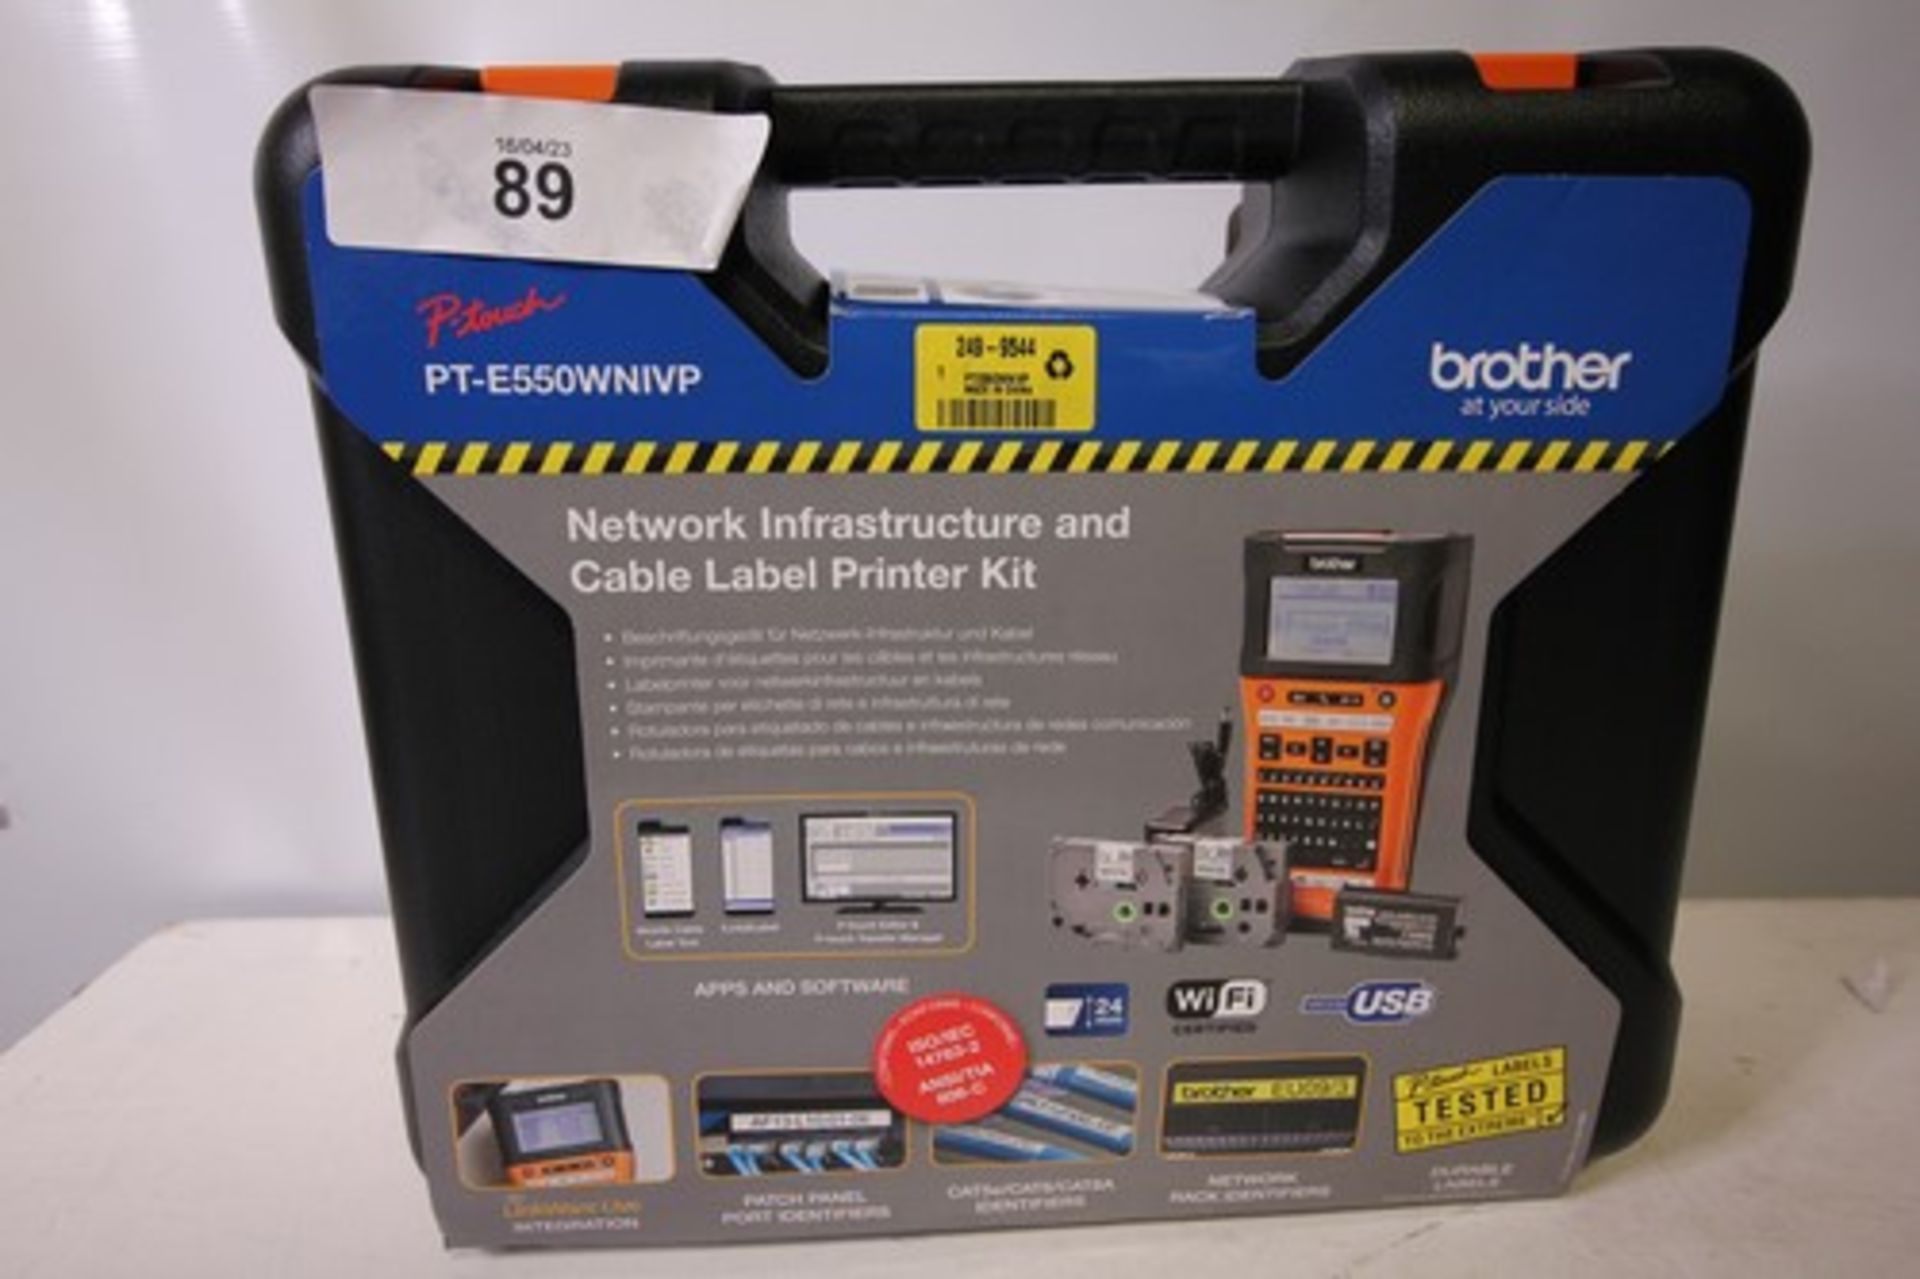 1 x Brother P-Touch E550 WNIVP label printer, code 3134320001 - New in box (SW6) - Image 3 of 3